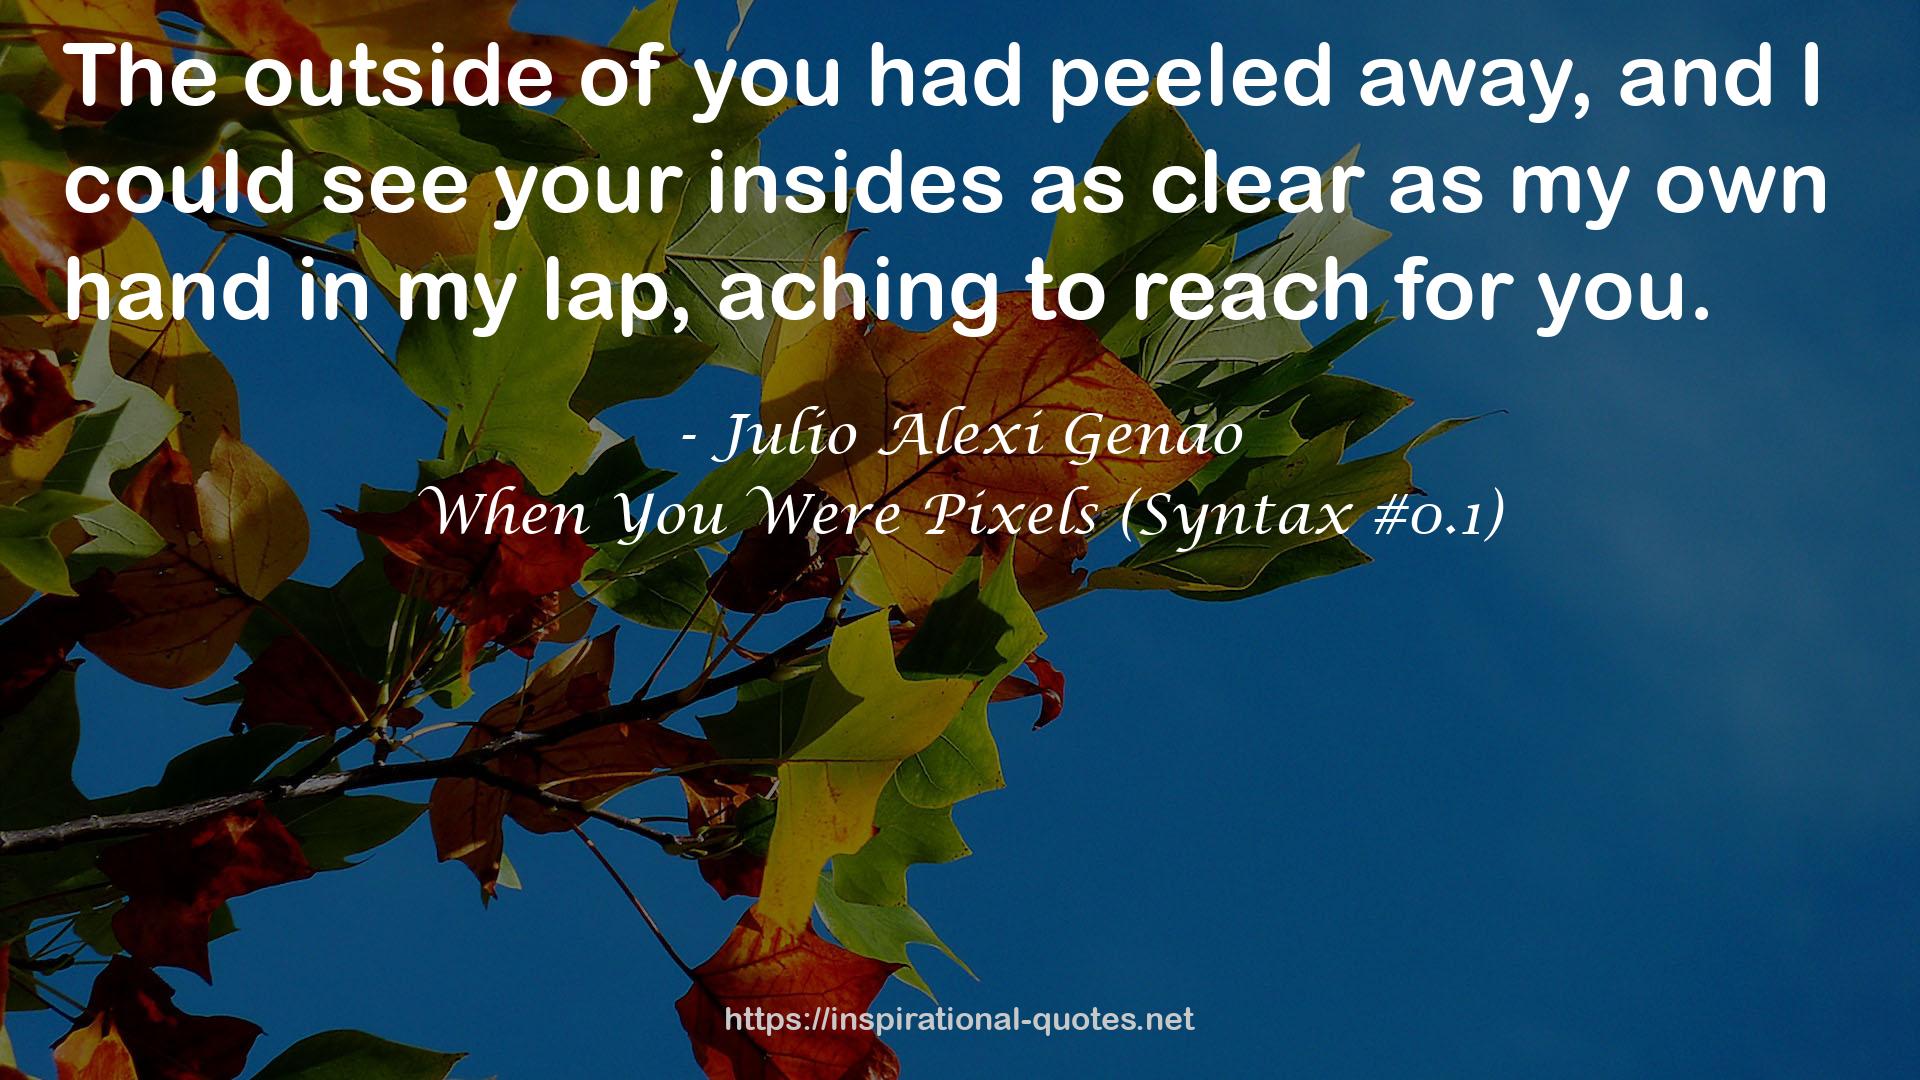 When You Were Pixels (Syntax #0.1) QUOTES